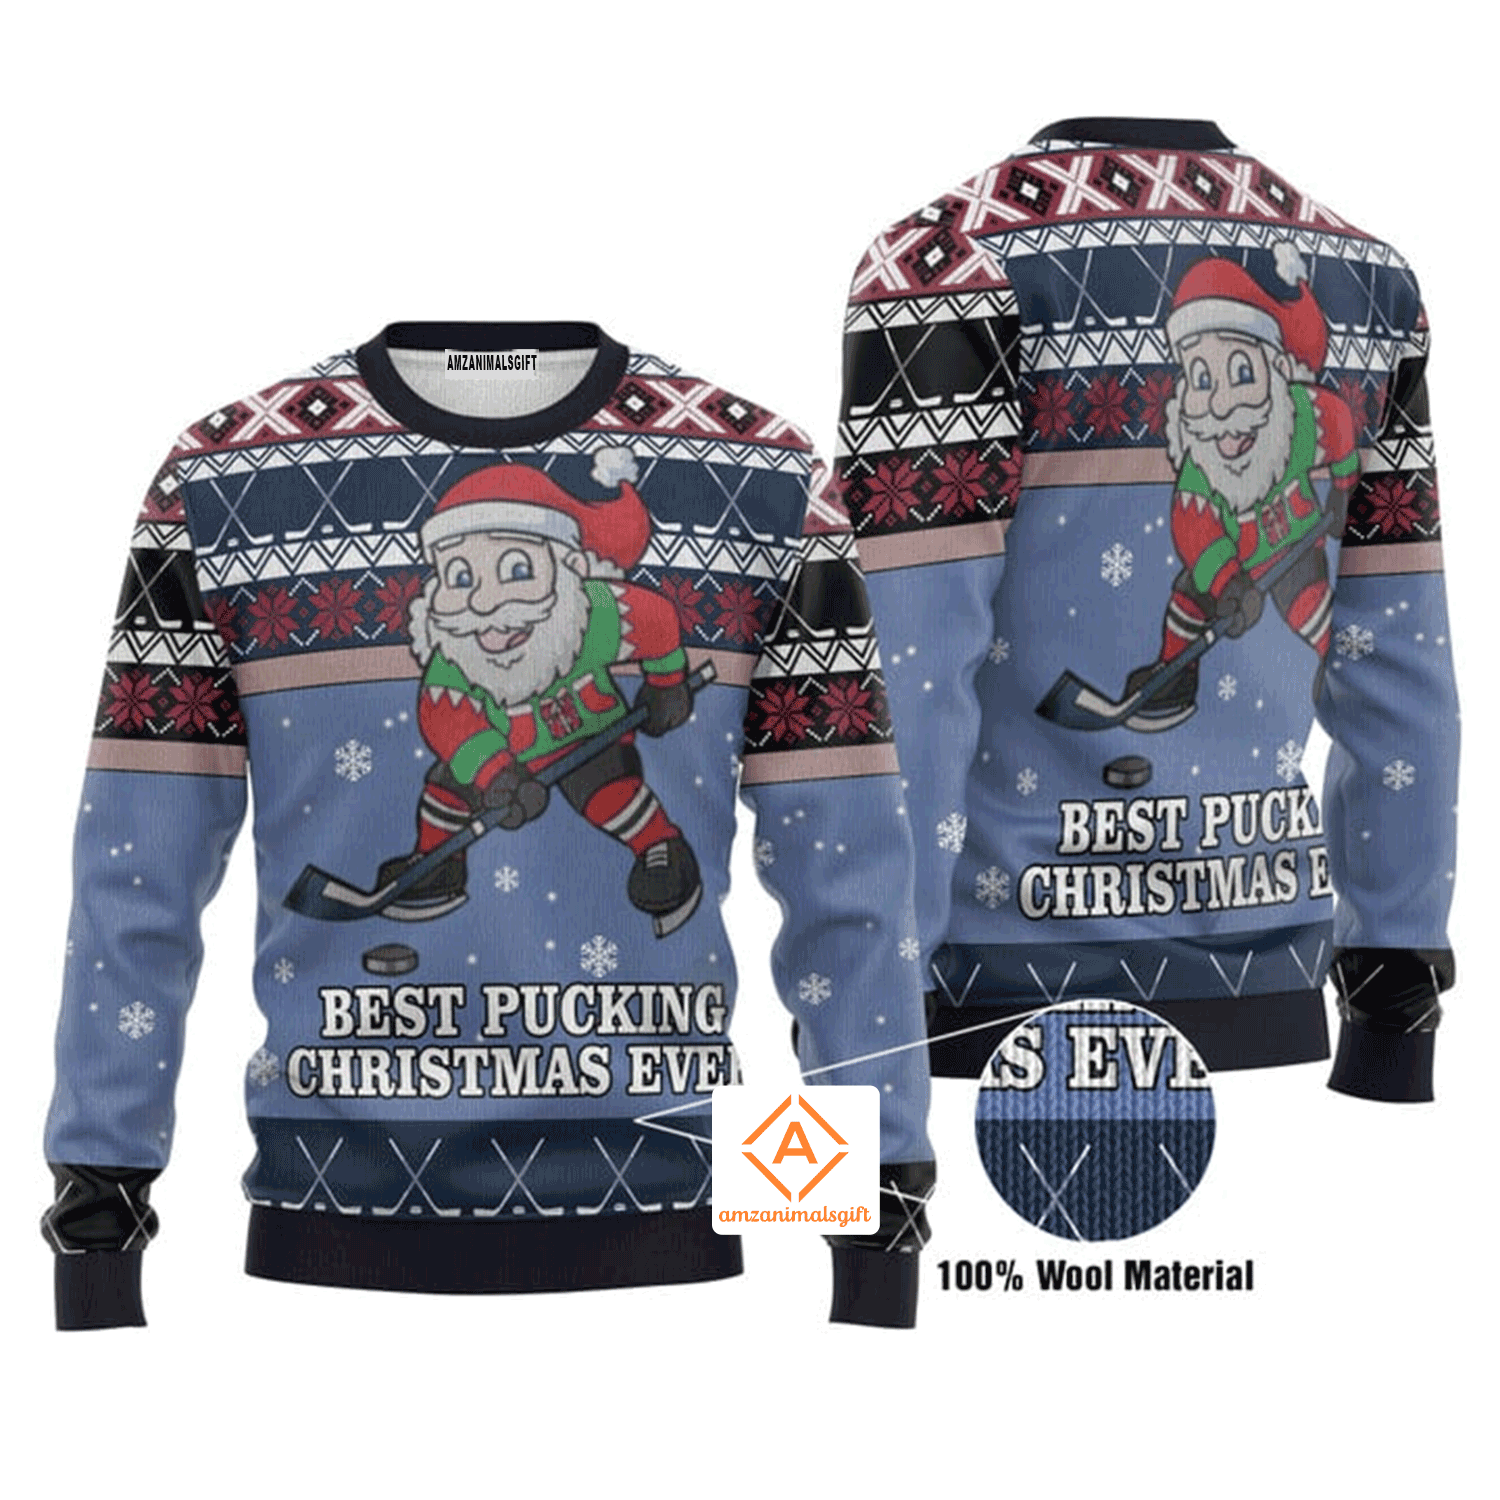 Santa Playing Hockey Christmas Sweater Best Pucking Christmas Ever, Ugly Sweater For Men & Women, Perfect Outfit For Christmas New Year Autumn Winter